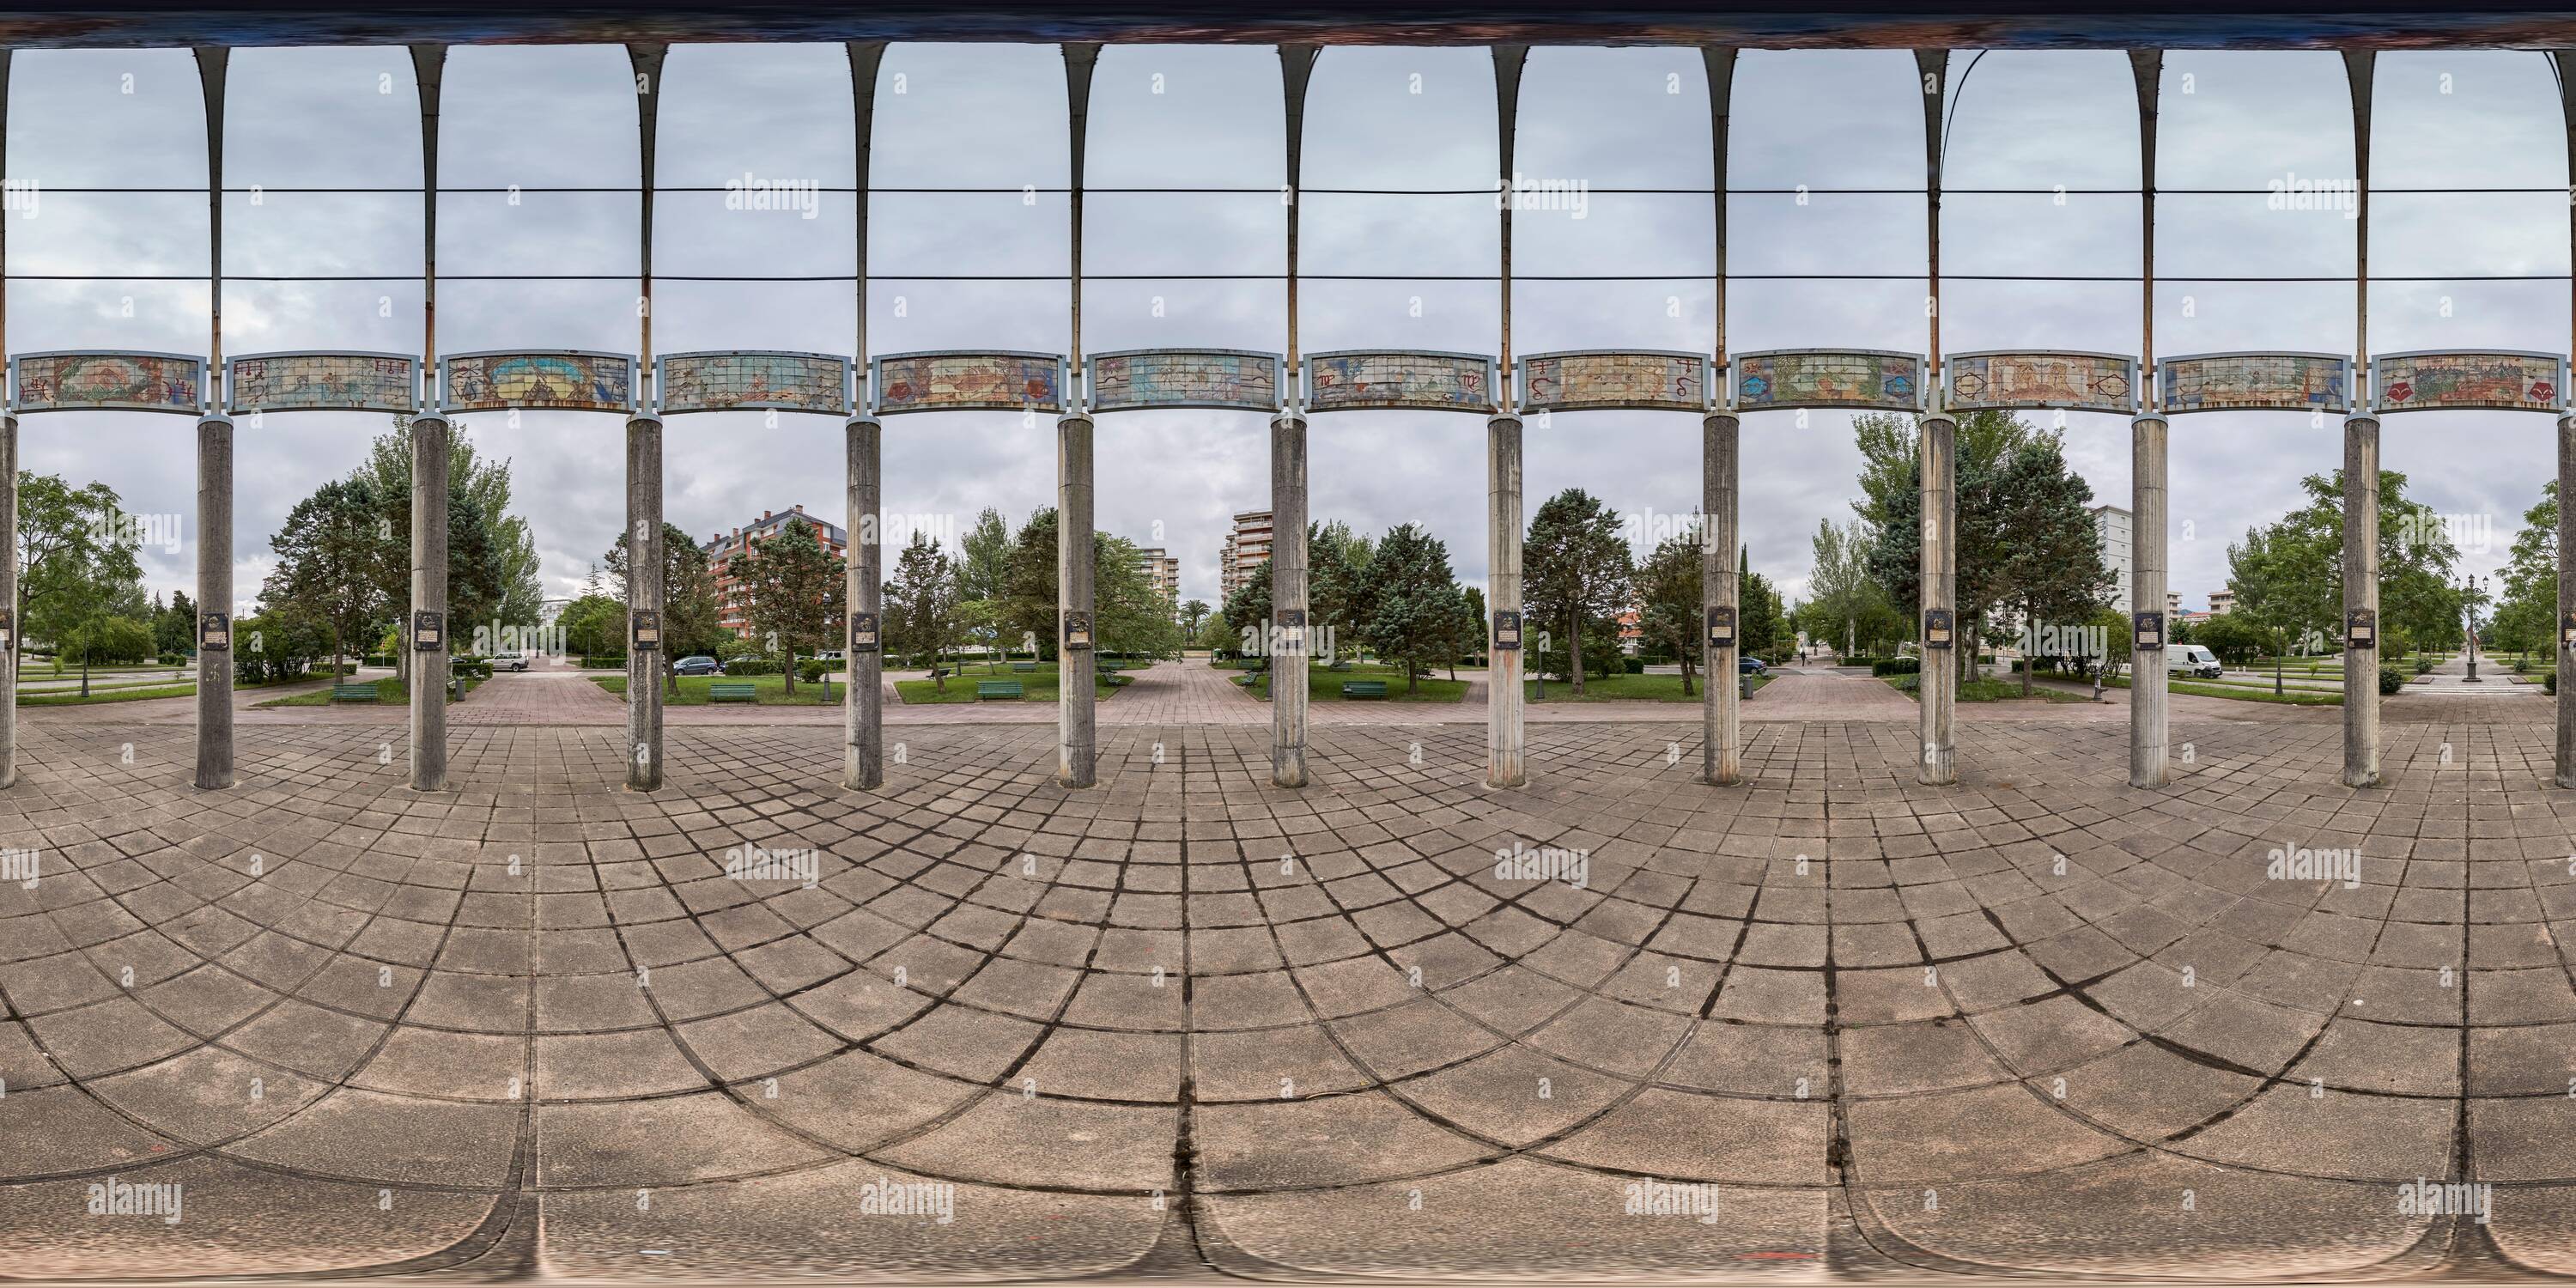 360 degree panoramic view of 360 Degree Panoramic: Artistic monument of columns with the horoscope and the planet Earth, in Tres Laredos Park, Laredo, Cantabria, Spain, Europe.